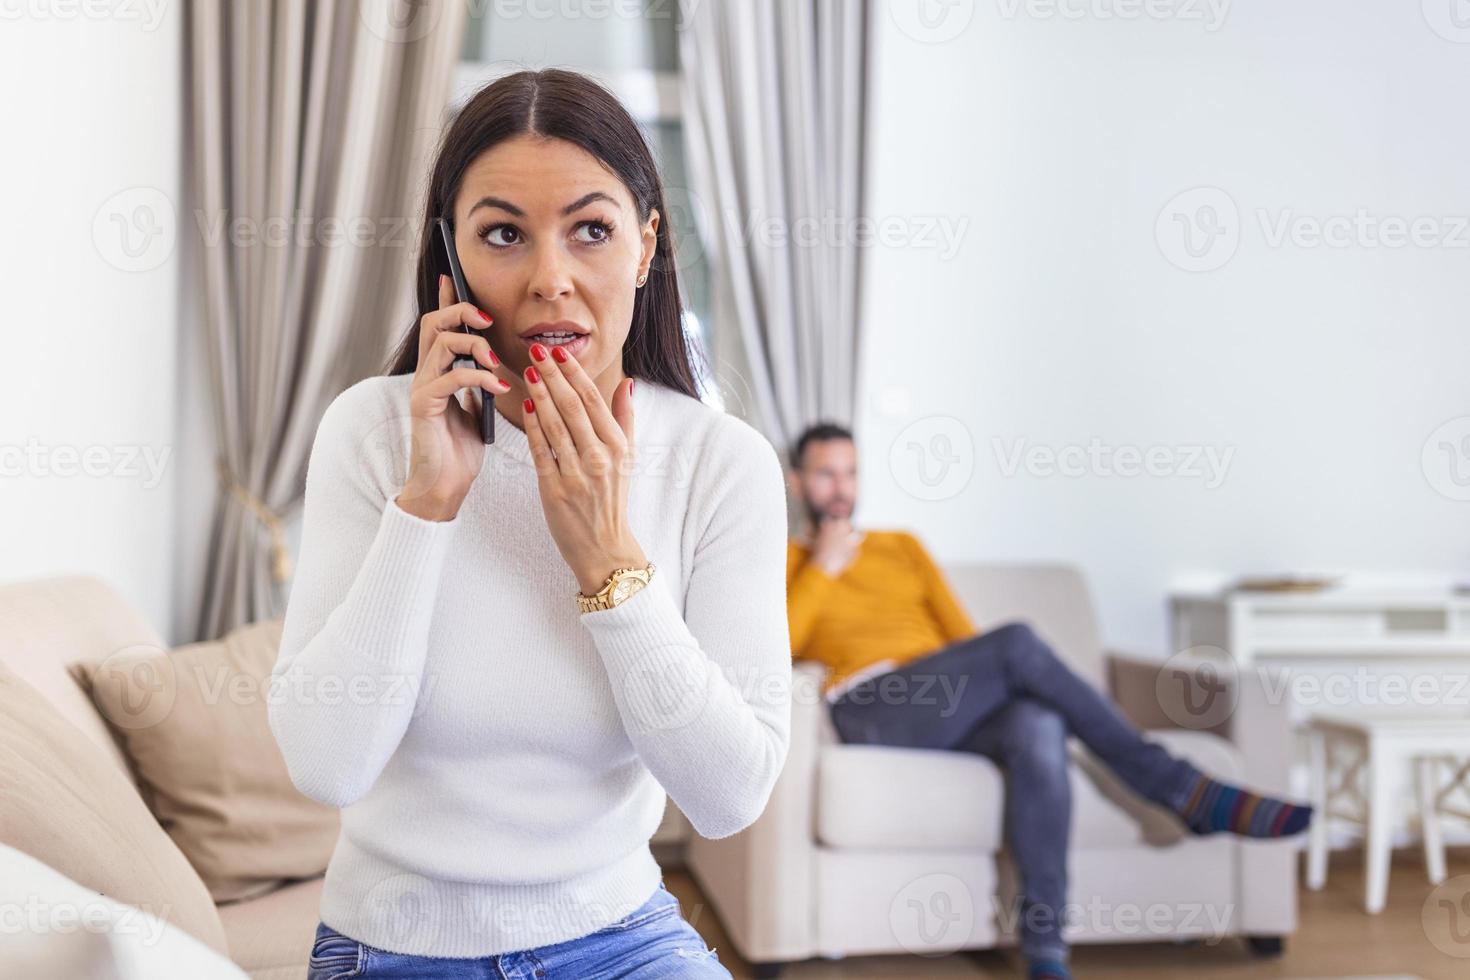 Woman turned her back to man, talking on phone with her lover, boyfriend sitting in the back watching tv. Cheating and infidelity concept photo